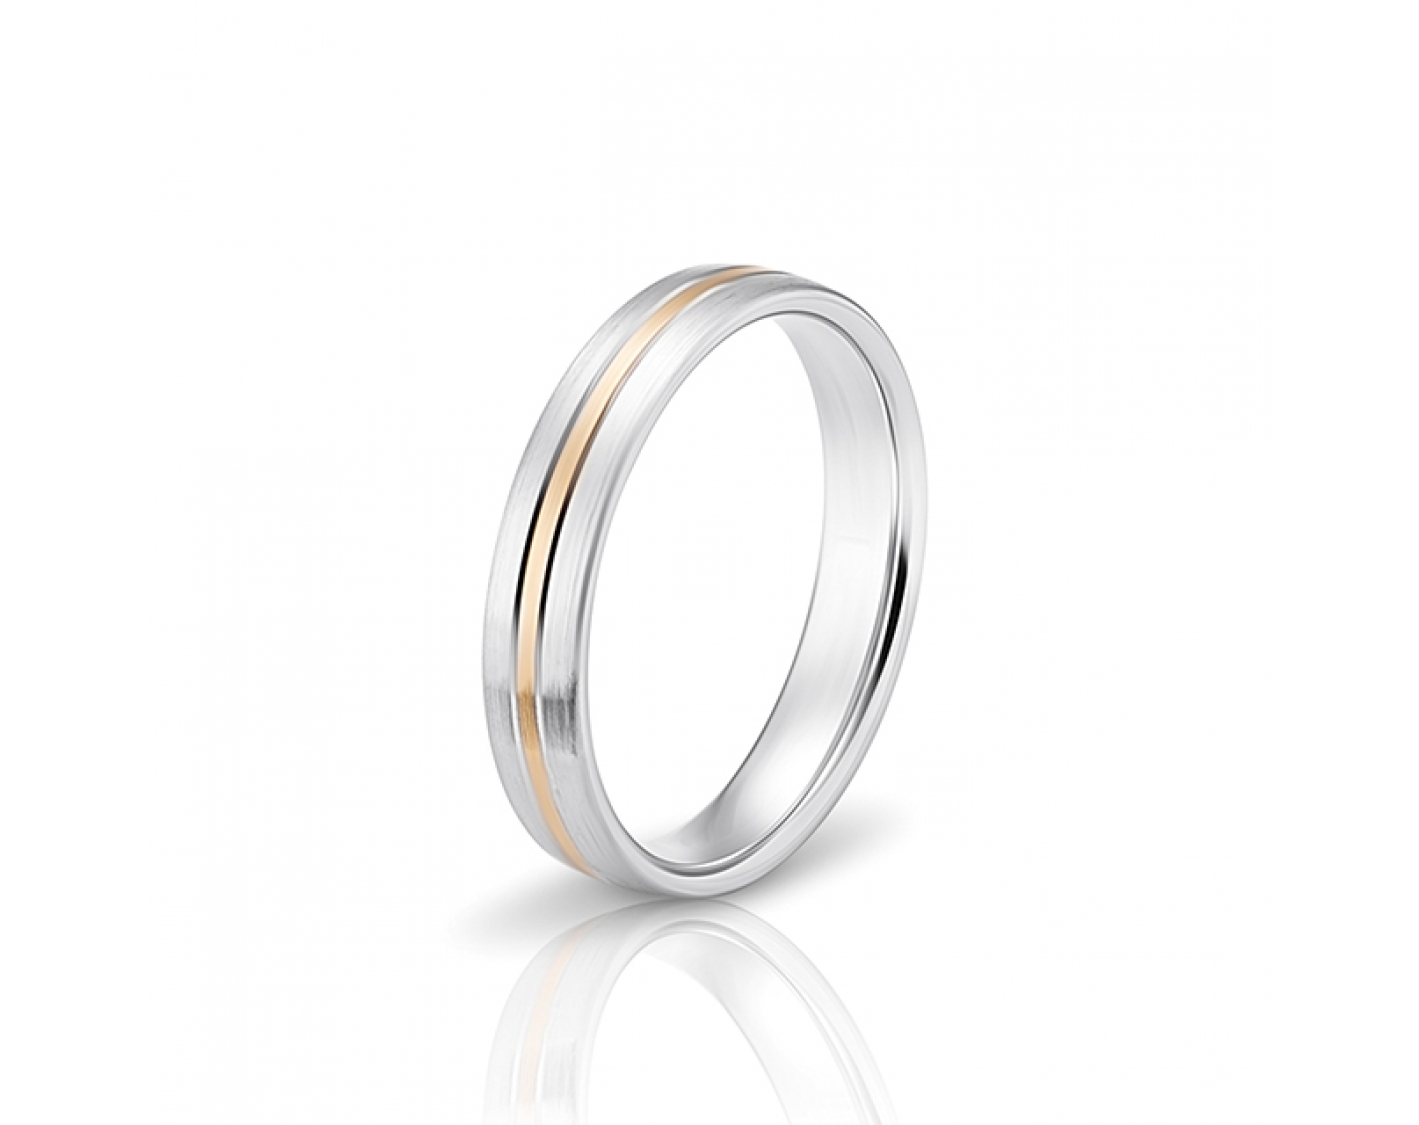 dual-tone 4mm two-toned* wedding band with a shiny line Photos & images